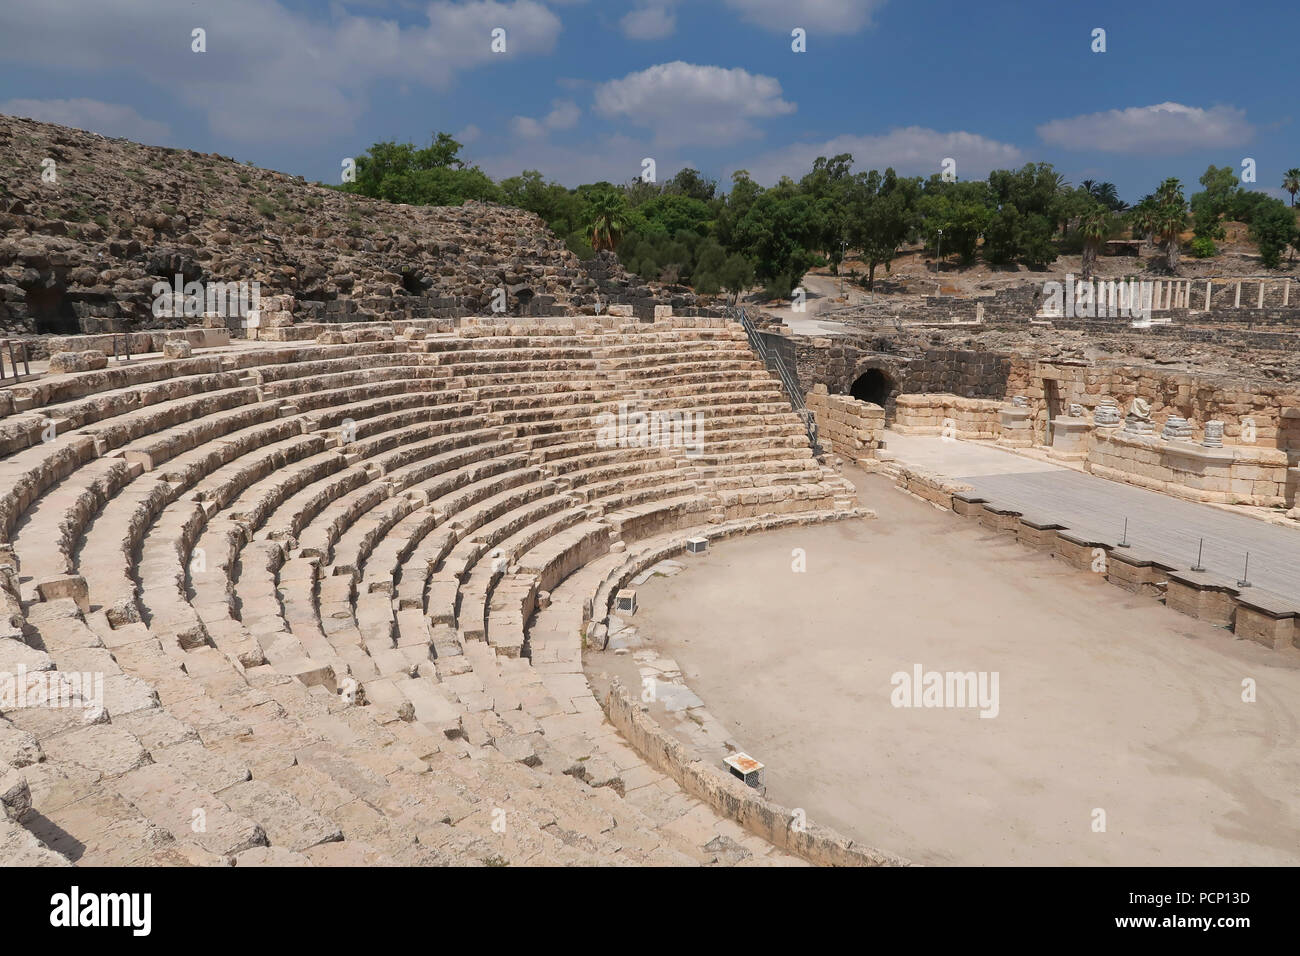 Remains of the 2nd century CE theater of the ancient Roman city Scythopolis in Beit Shean National Park, Israel Stock Photo